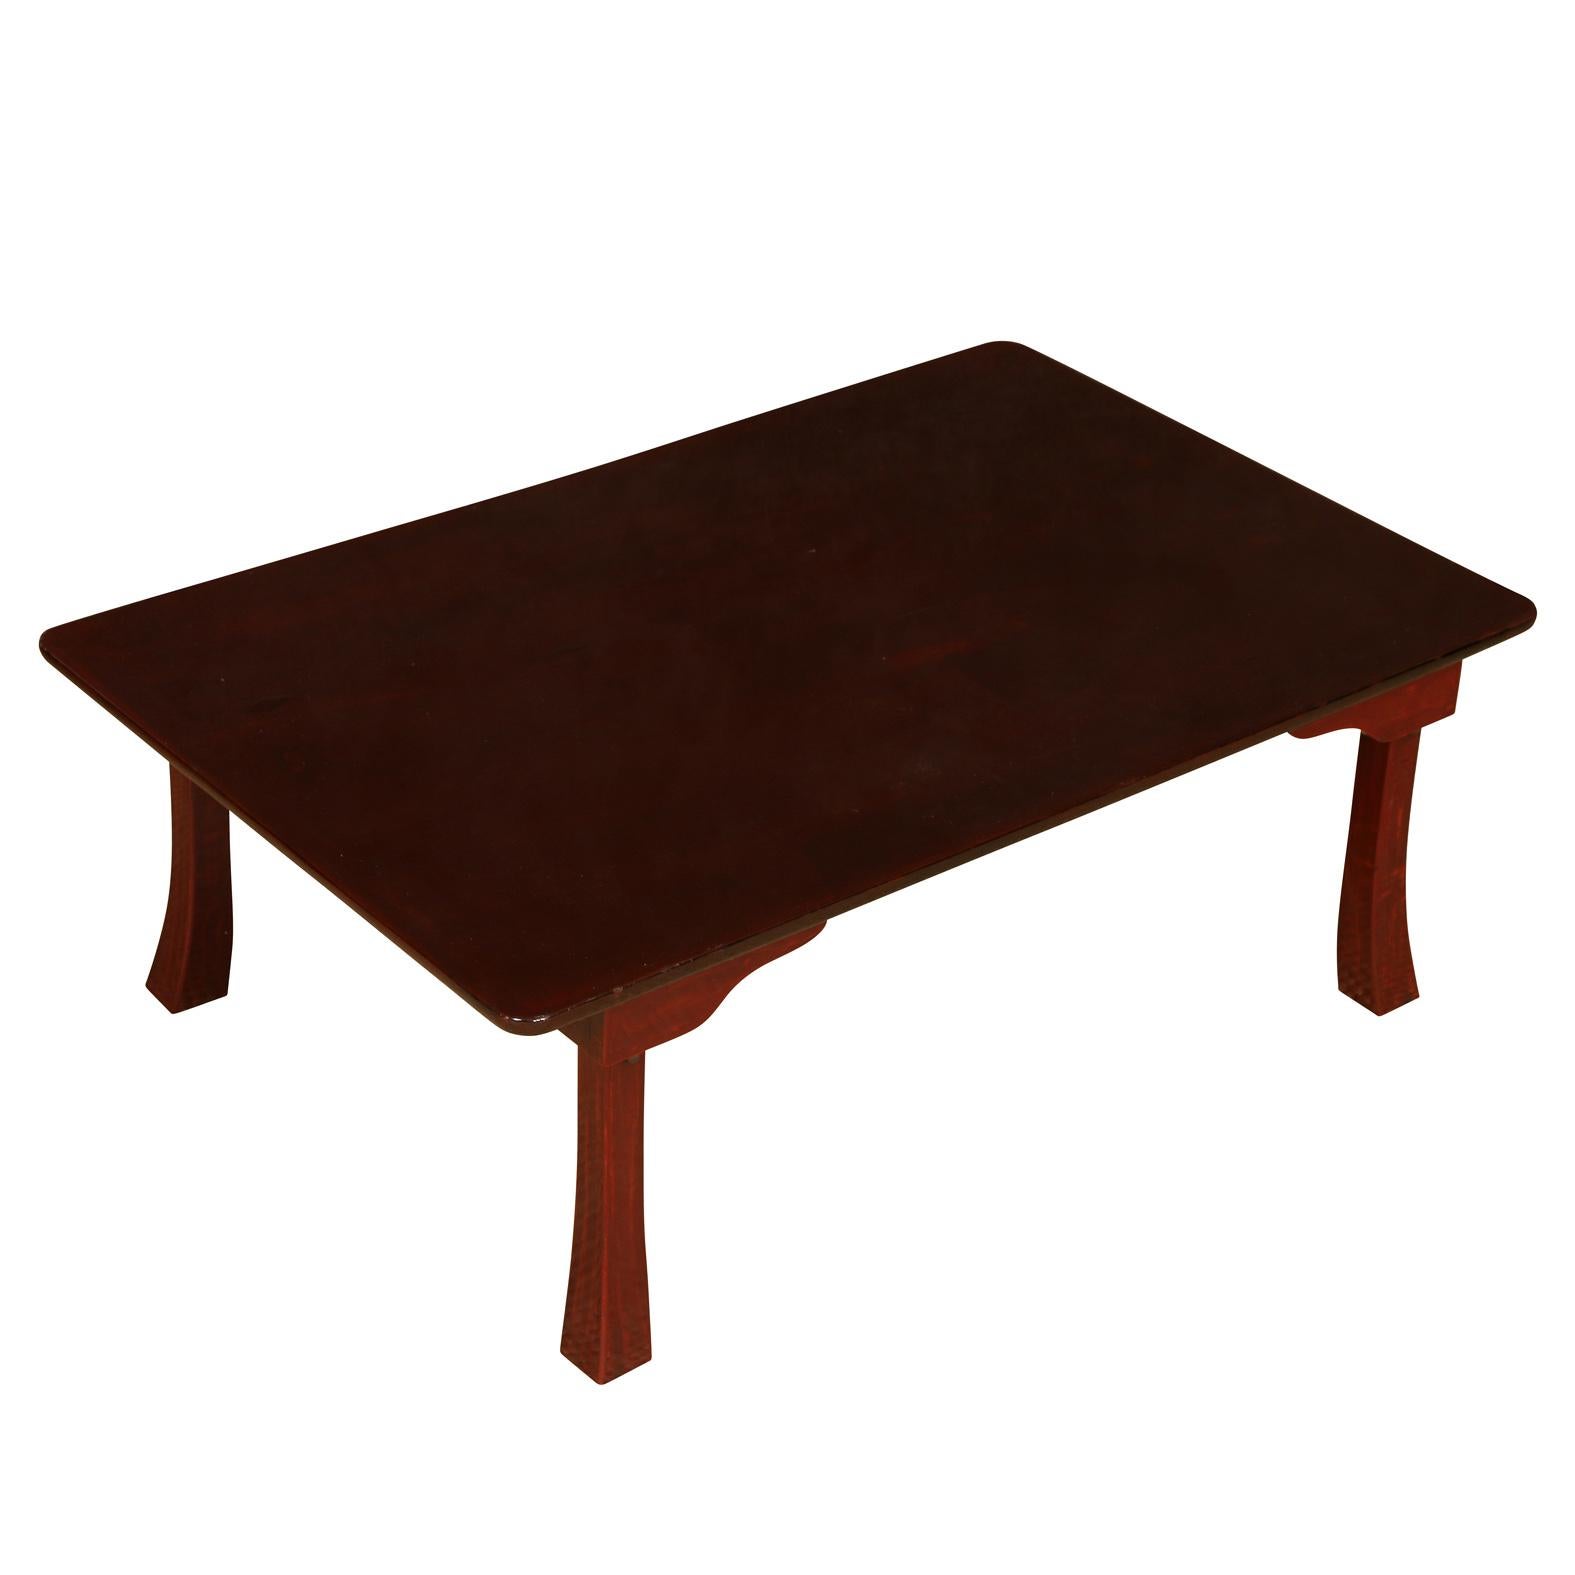 A vintage Asian hardwood low coffee table with high gloss finish to top and shaped legs.